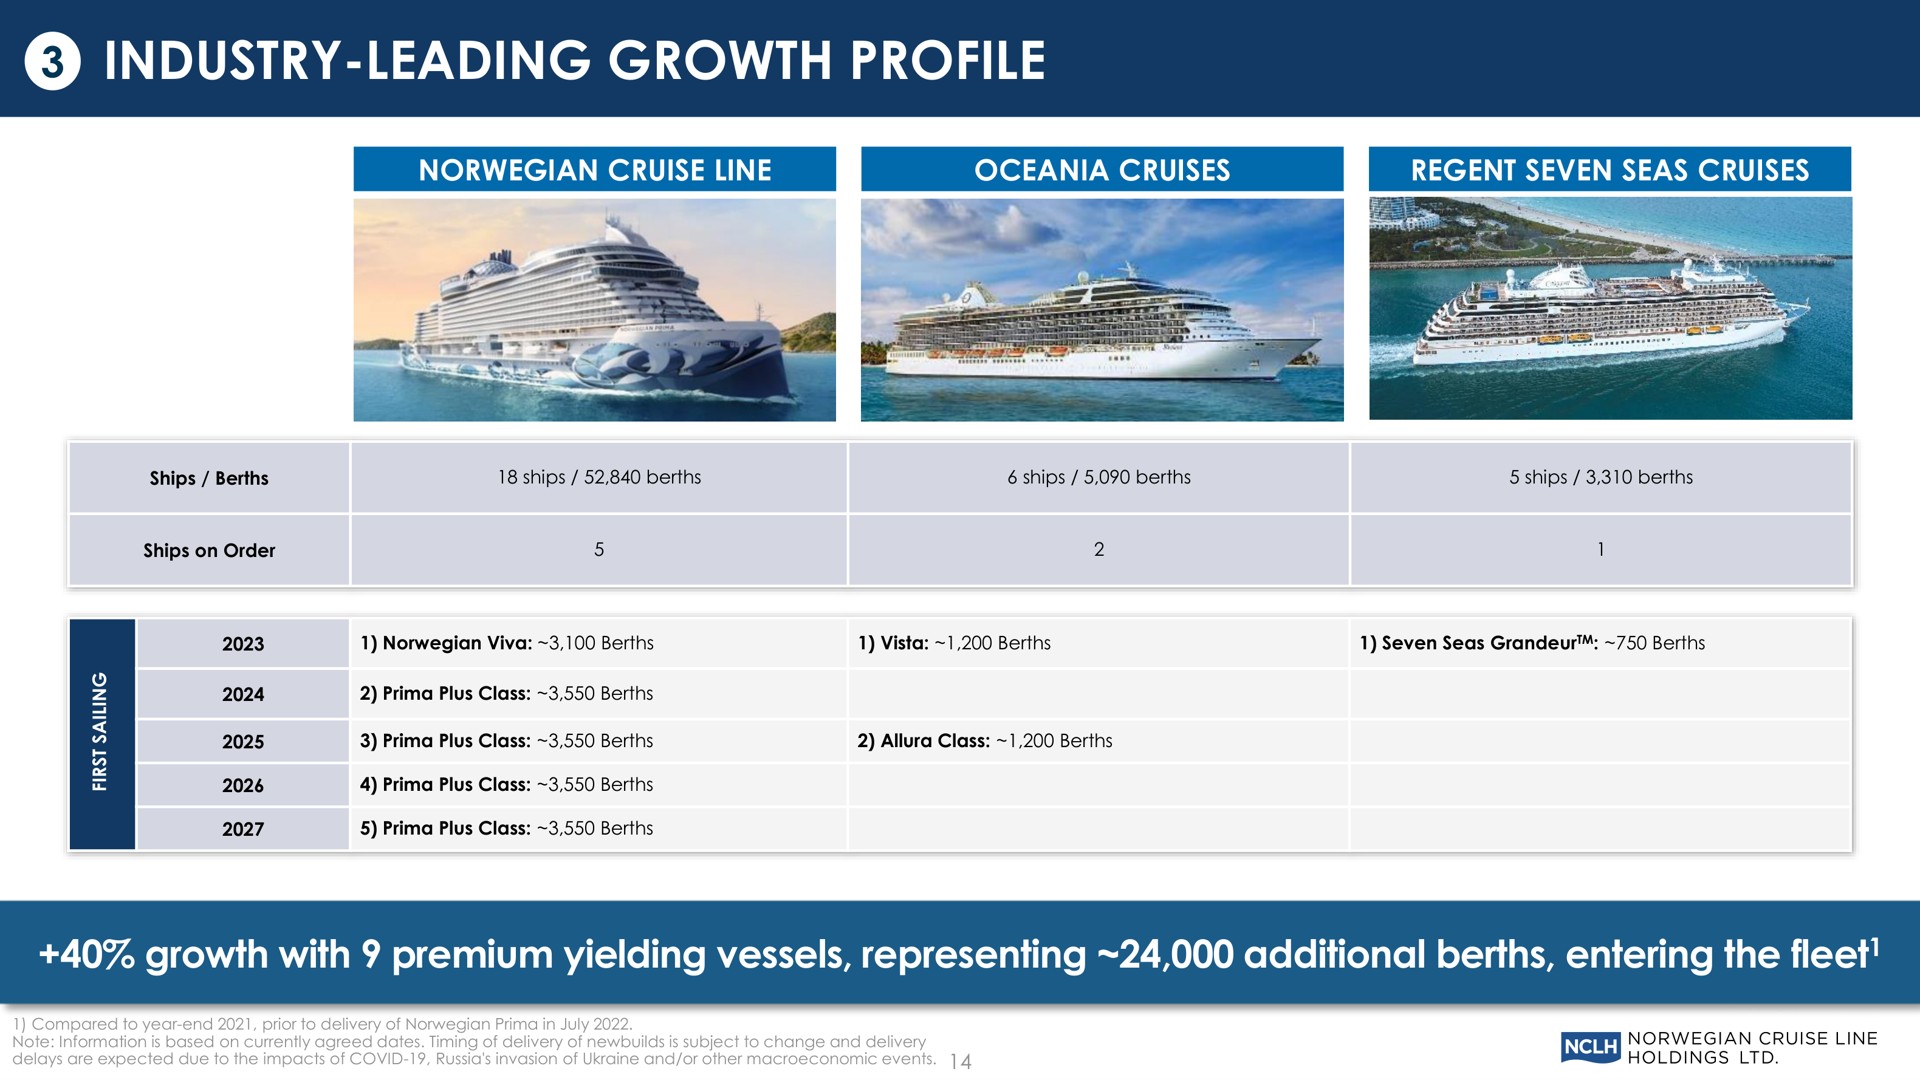 industry leading growth profile growth with premium yielding vessels representing additional berths entering the fleet | Norwegian Cruise Line